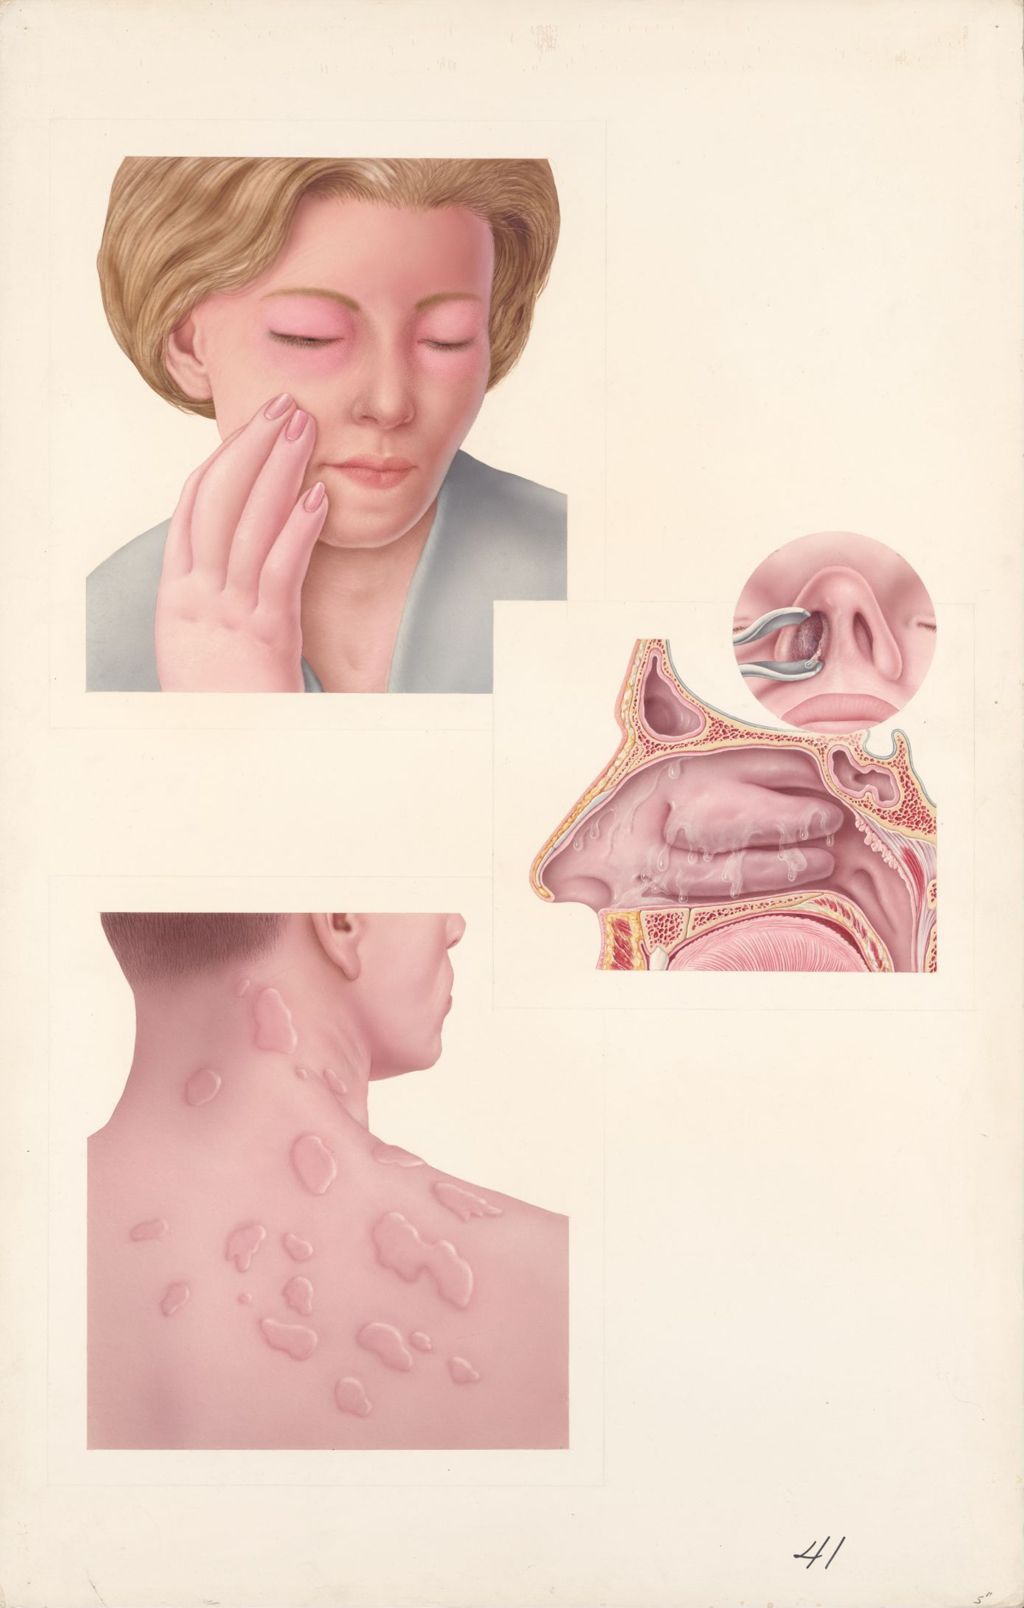 Medical Profiles, Decadron, Dual phase, Several representative manifestations of allergic reactions